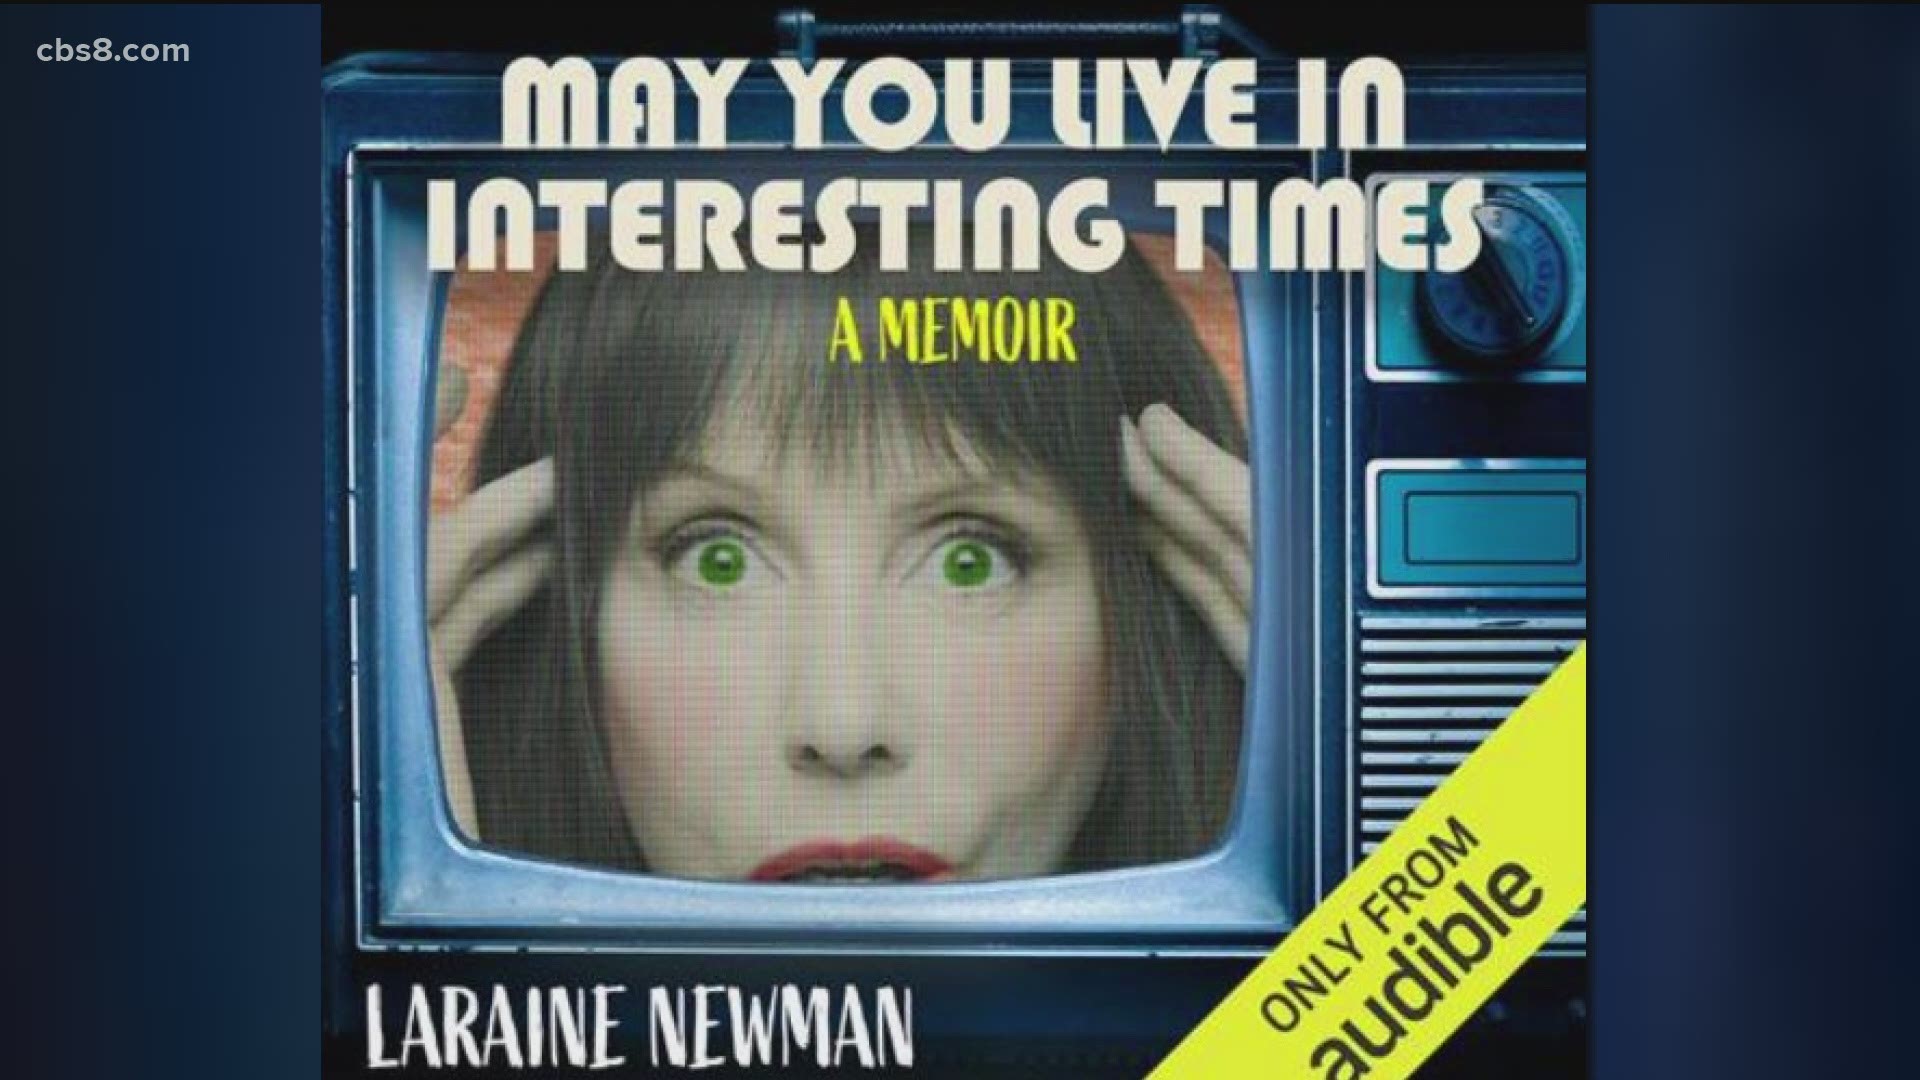 The book is called, “May You Live in Interesting Times."